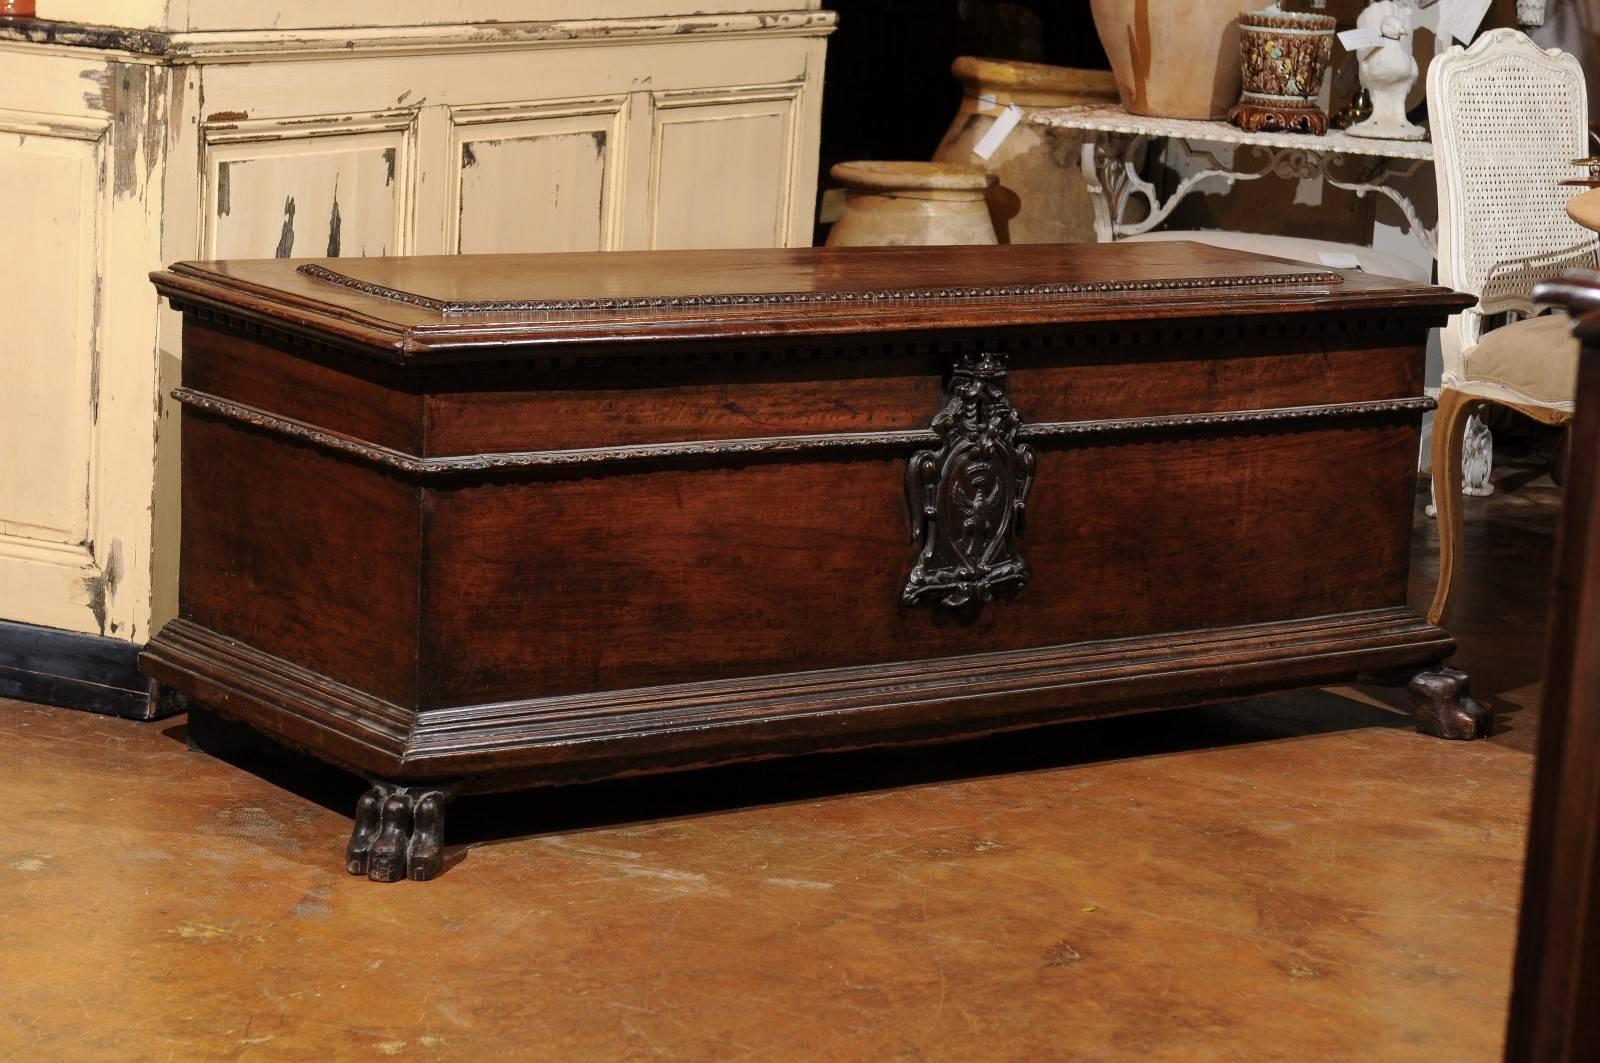 An Italian early 19th century wooden cassone chest with family crest, dentil molding and lion paw feet. Cassone chests were traditionally given as wedding gifts and were part of the bridal suite. As such, they were very prized possessions and in our